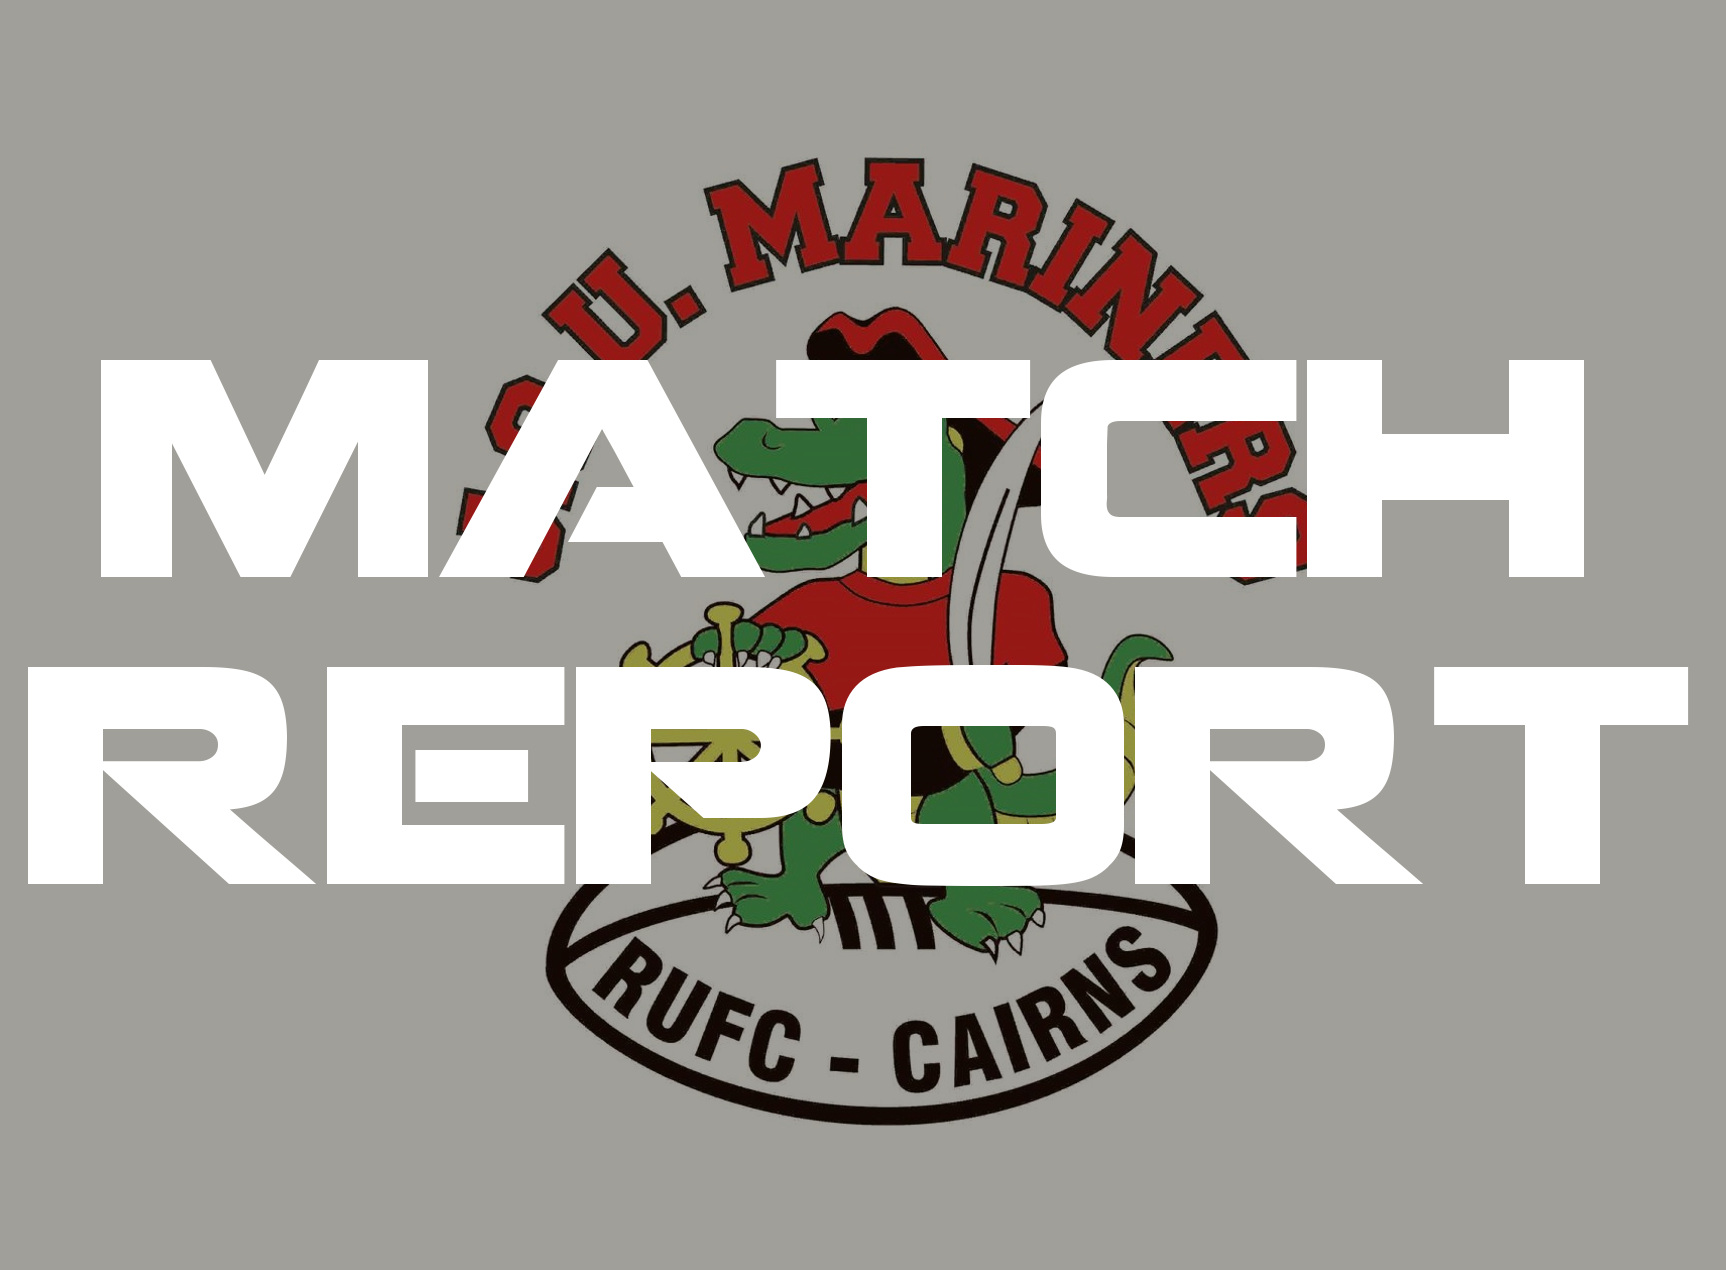 Mariners Rugby Cairns Match Report